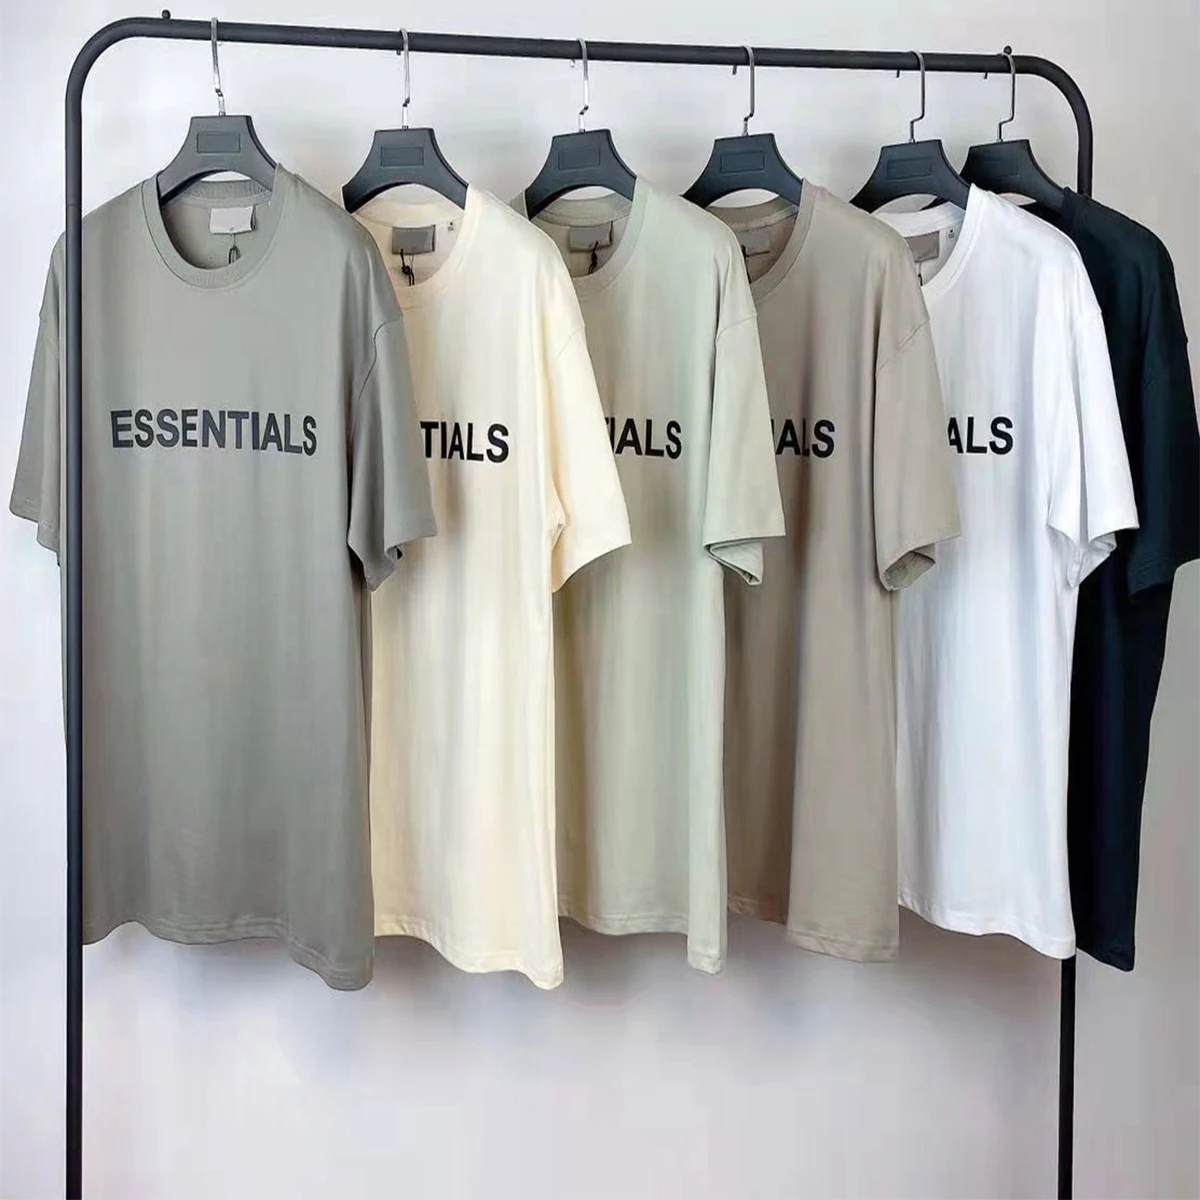 Essentials T-shirt Jerry Lorenzo Letters Printing 1